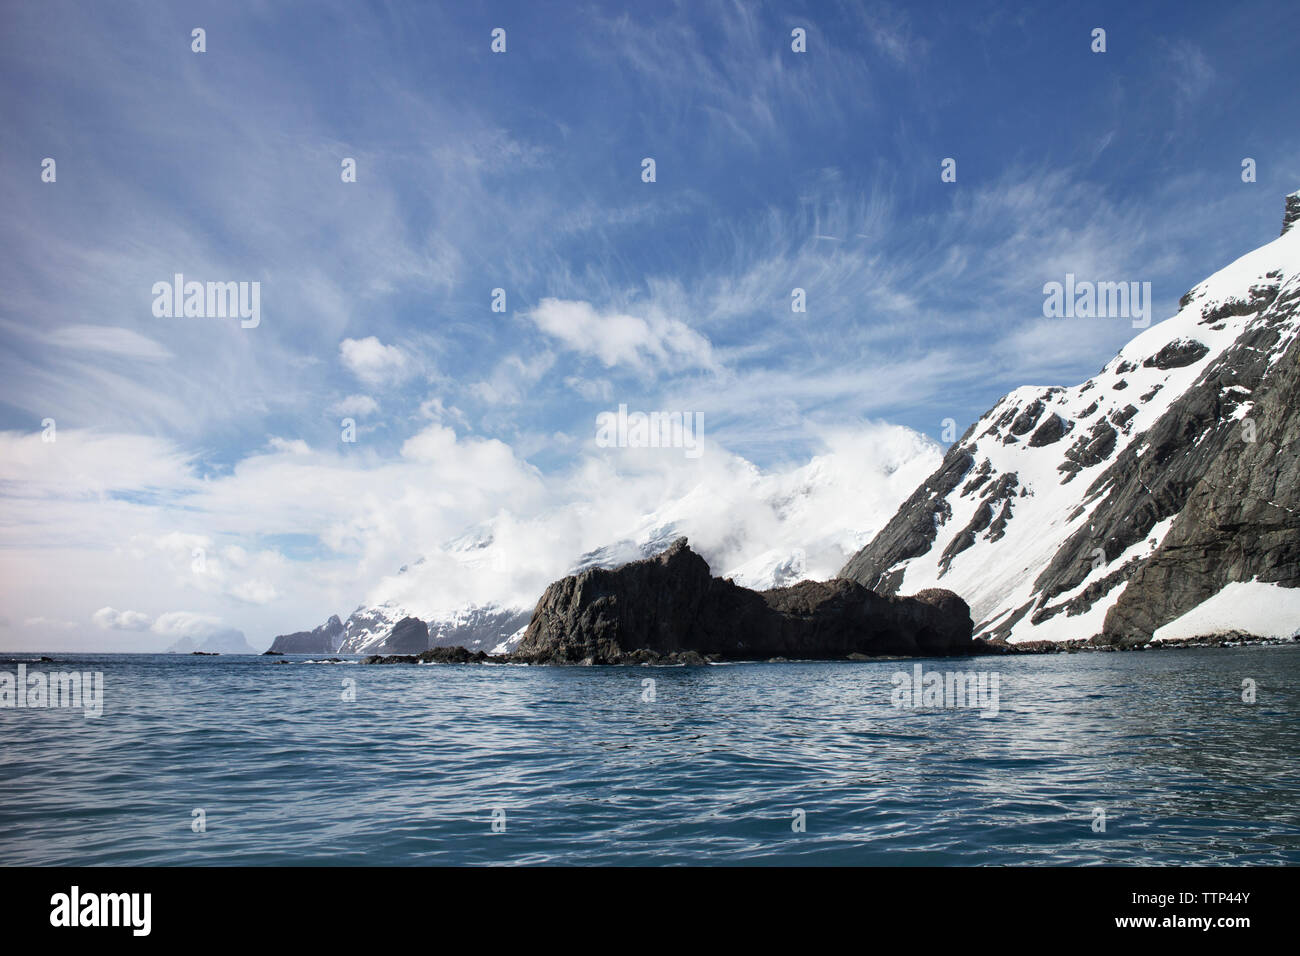 Sea and snow covered mountains against cloudy sky Stock Photo